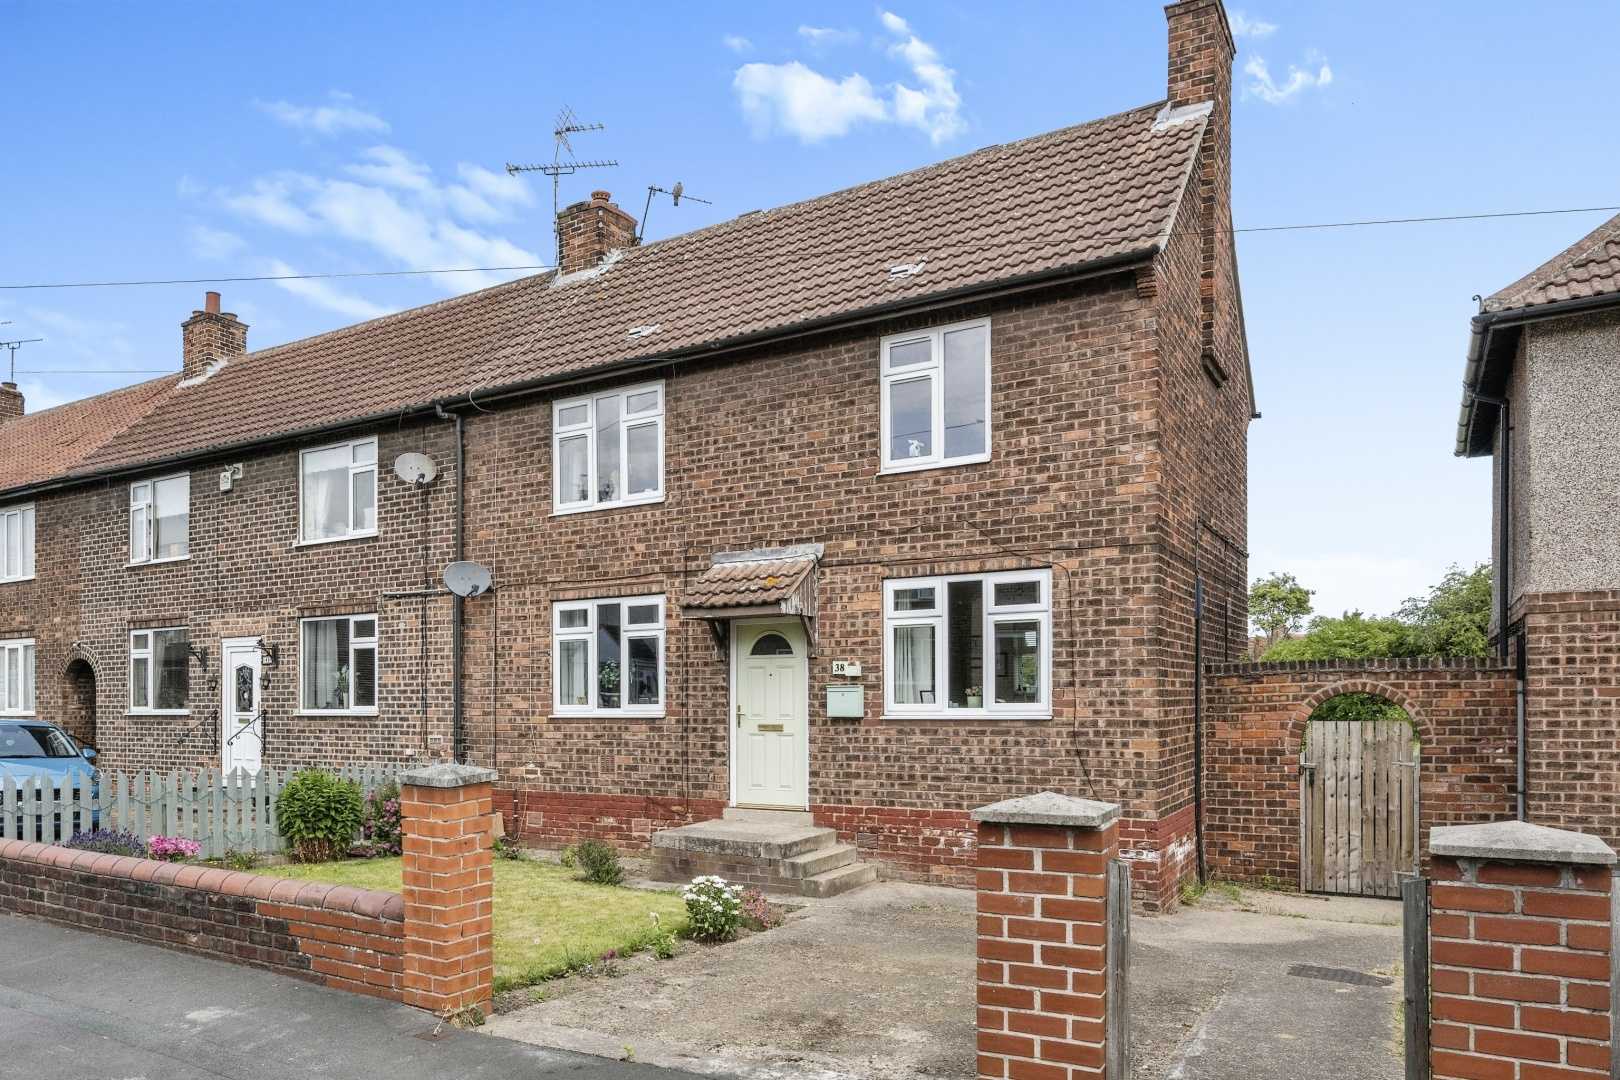 House in Adwick le Street, Doncaster 11953931